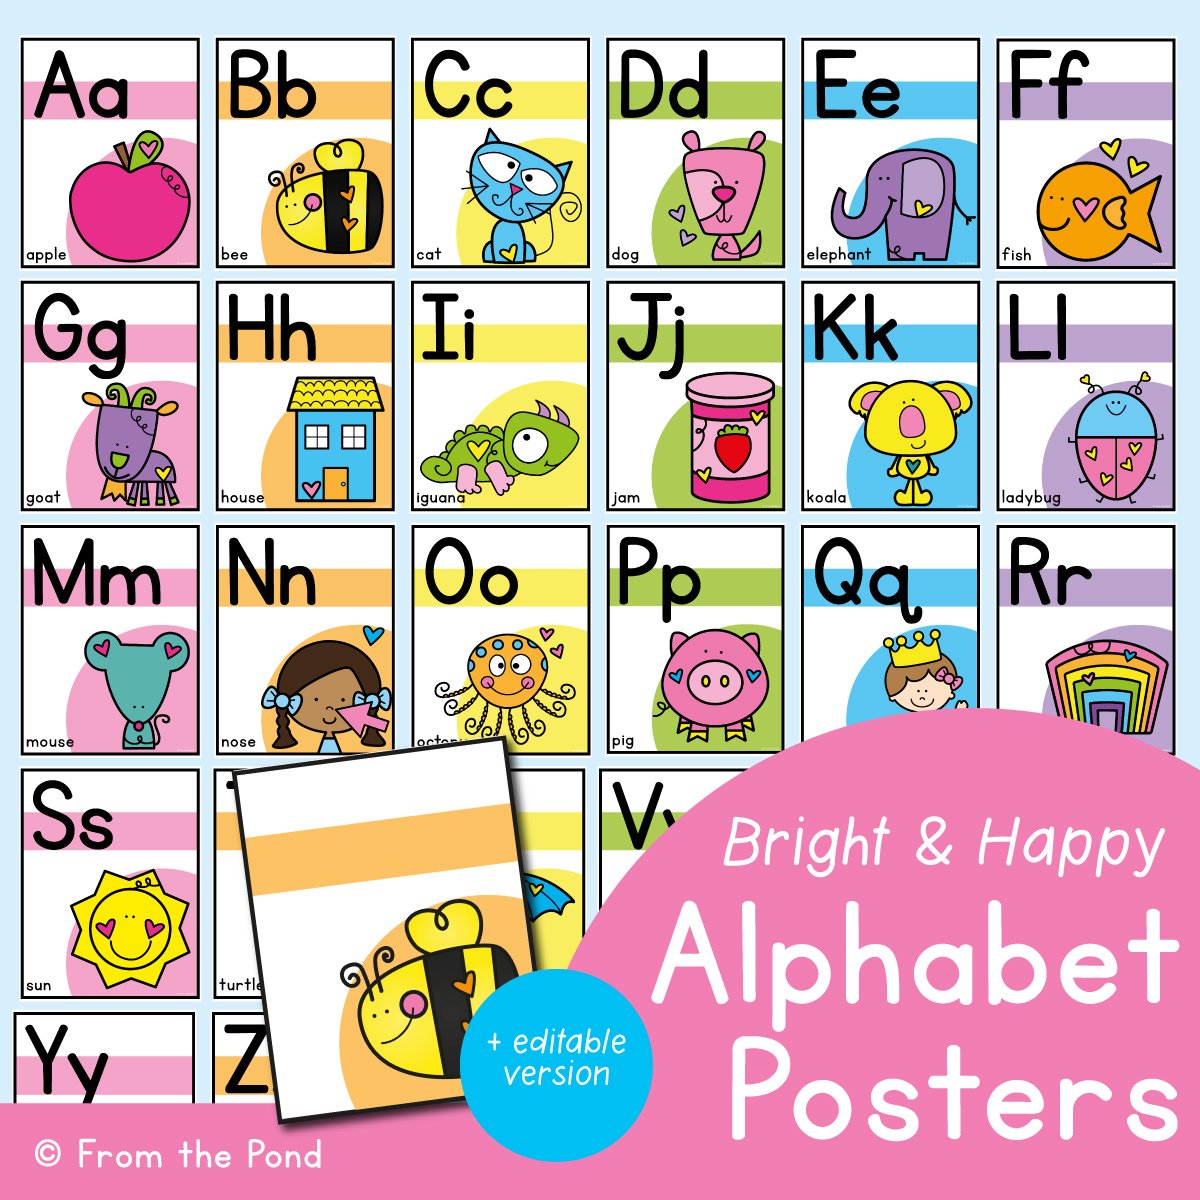 bright-and-happy-alphabet-posters-pic-01.jpg